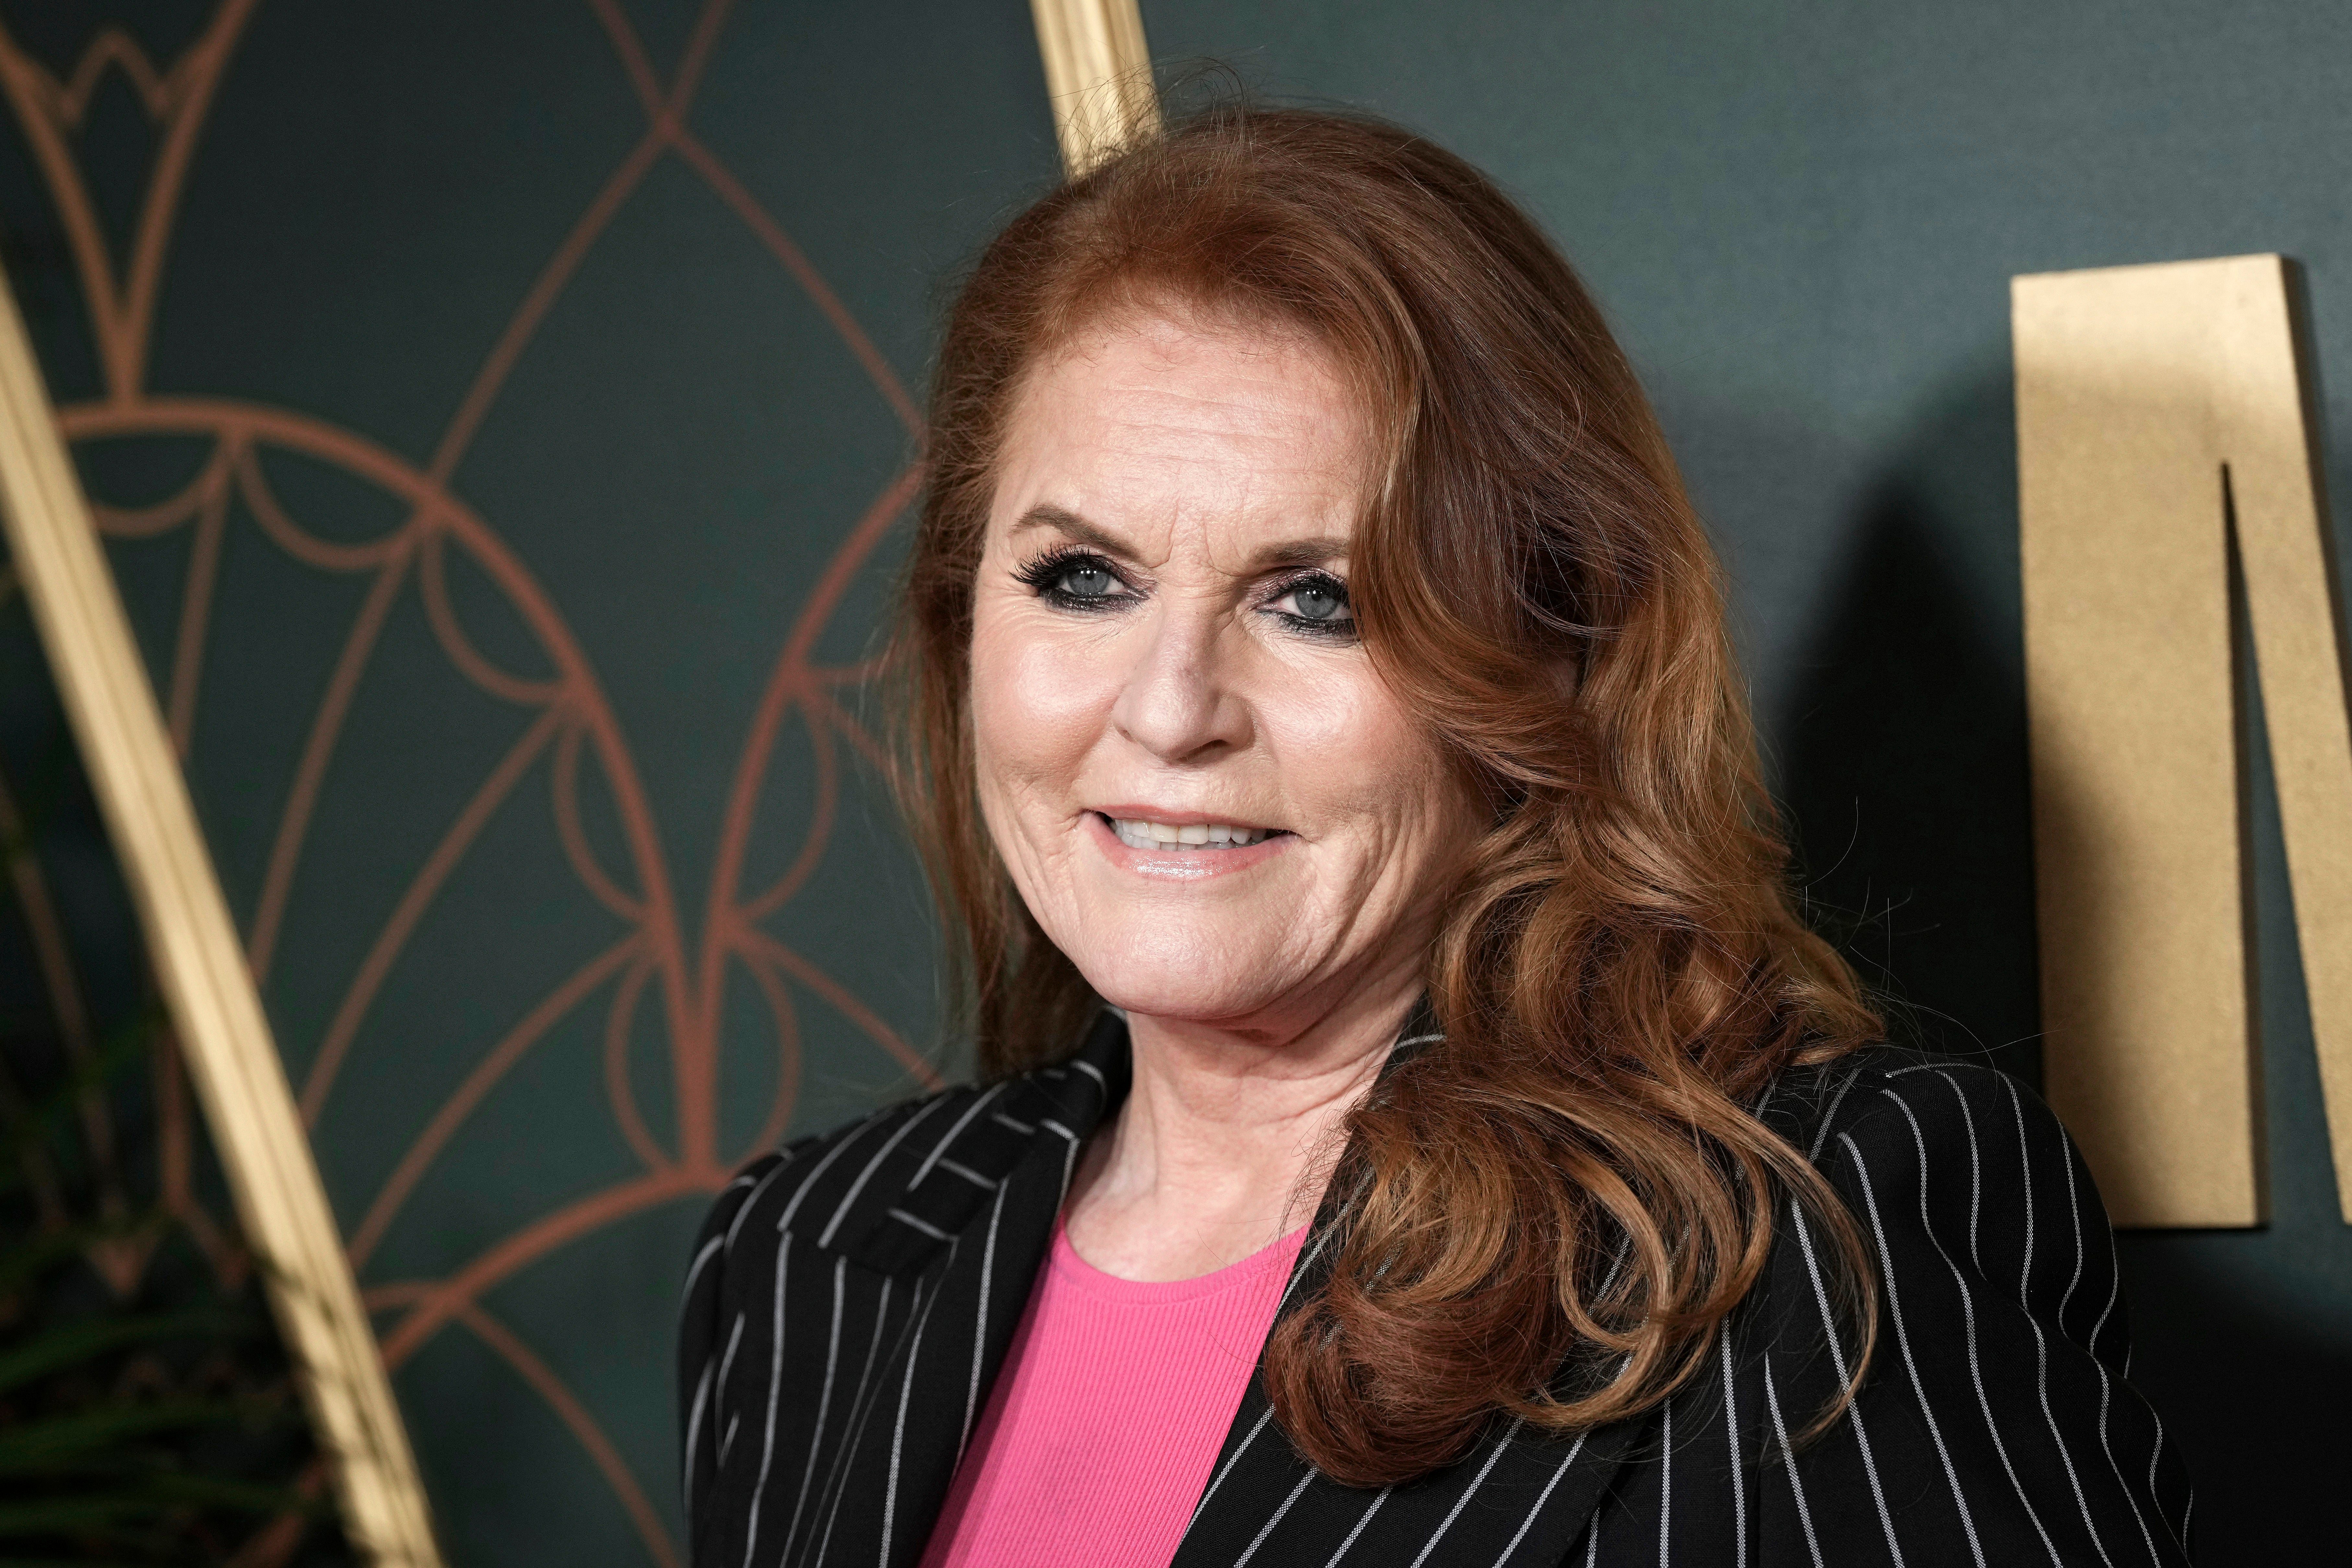 Sarah Ferguson was diagnosed with skin cancer after treatment for breast cancer